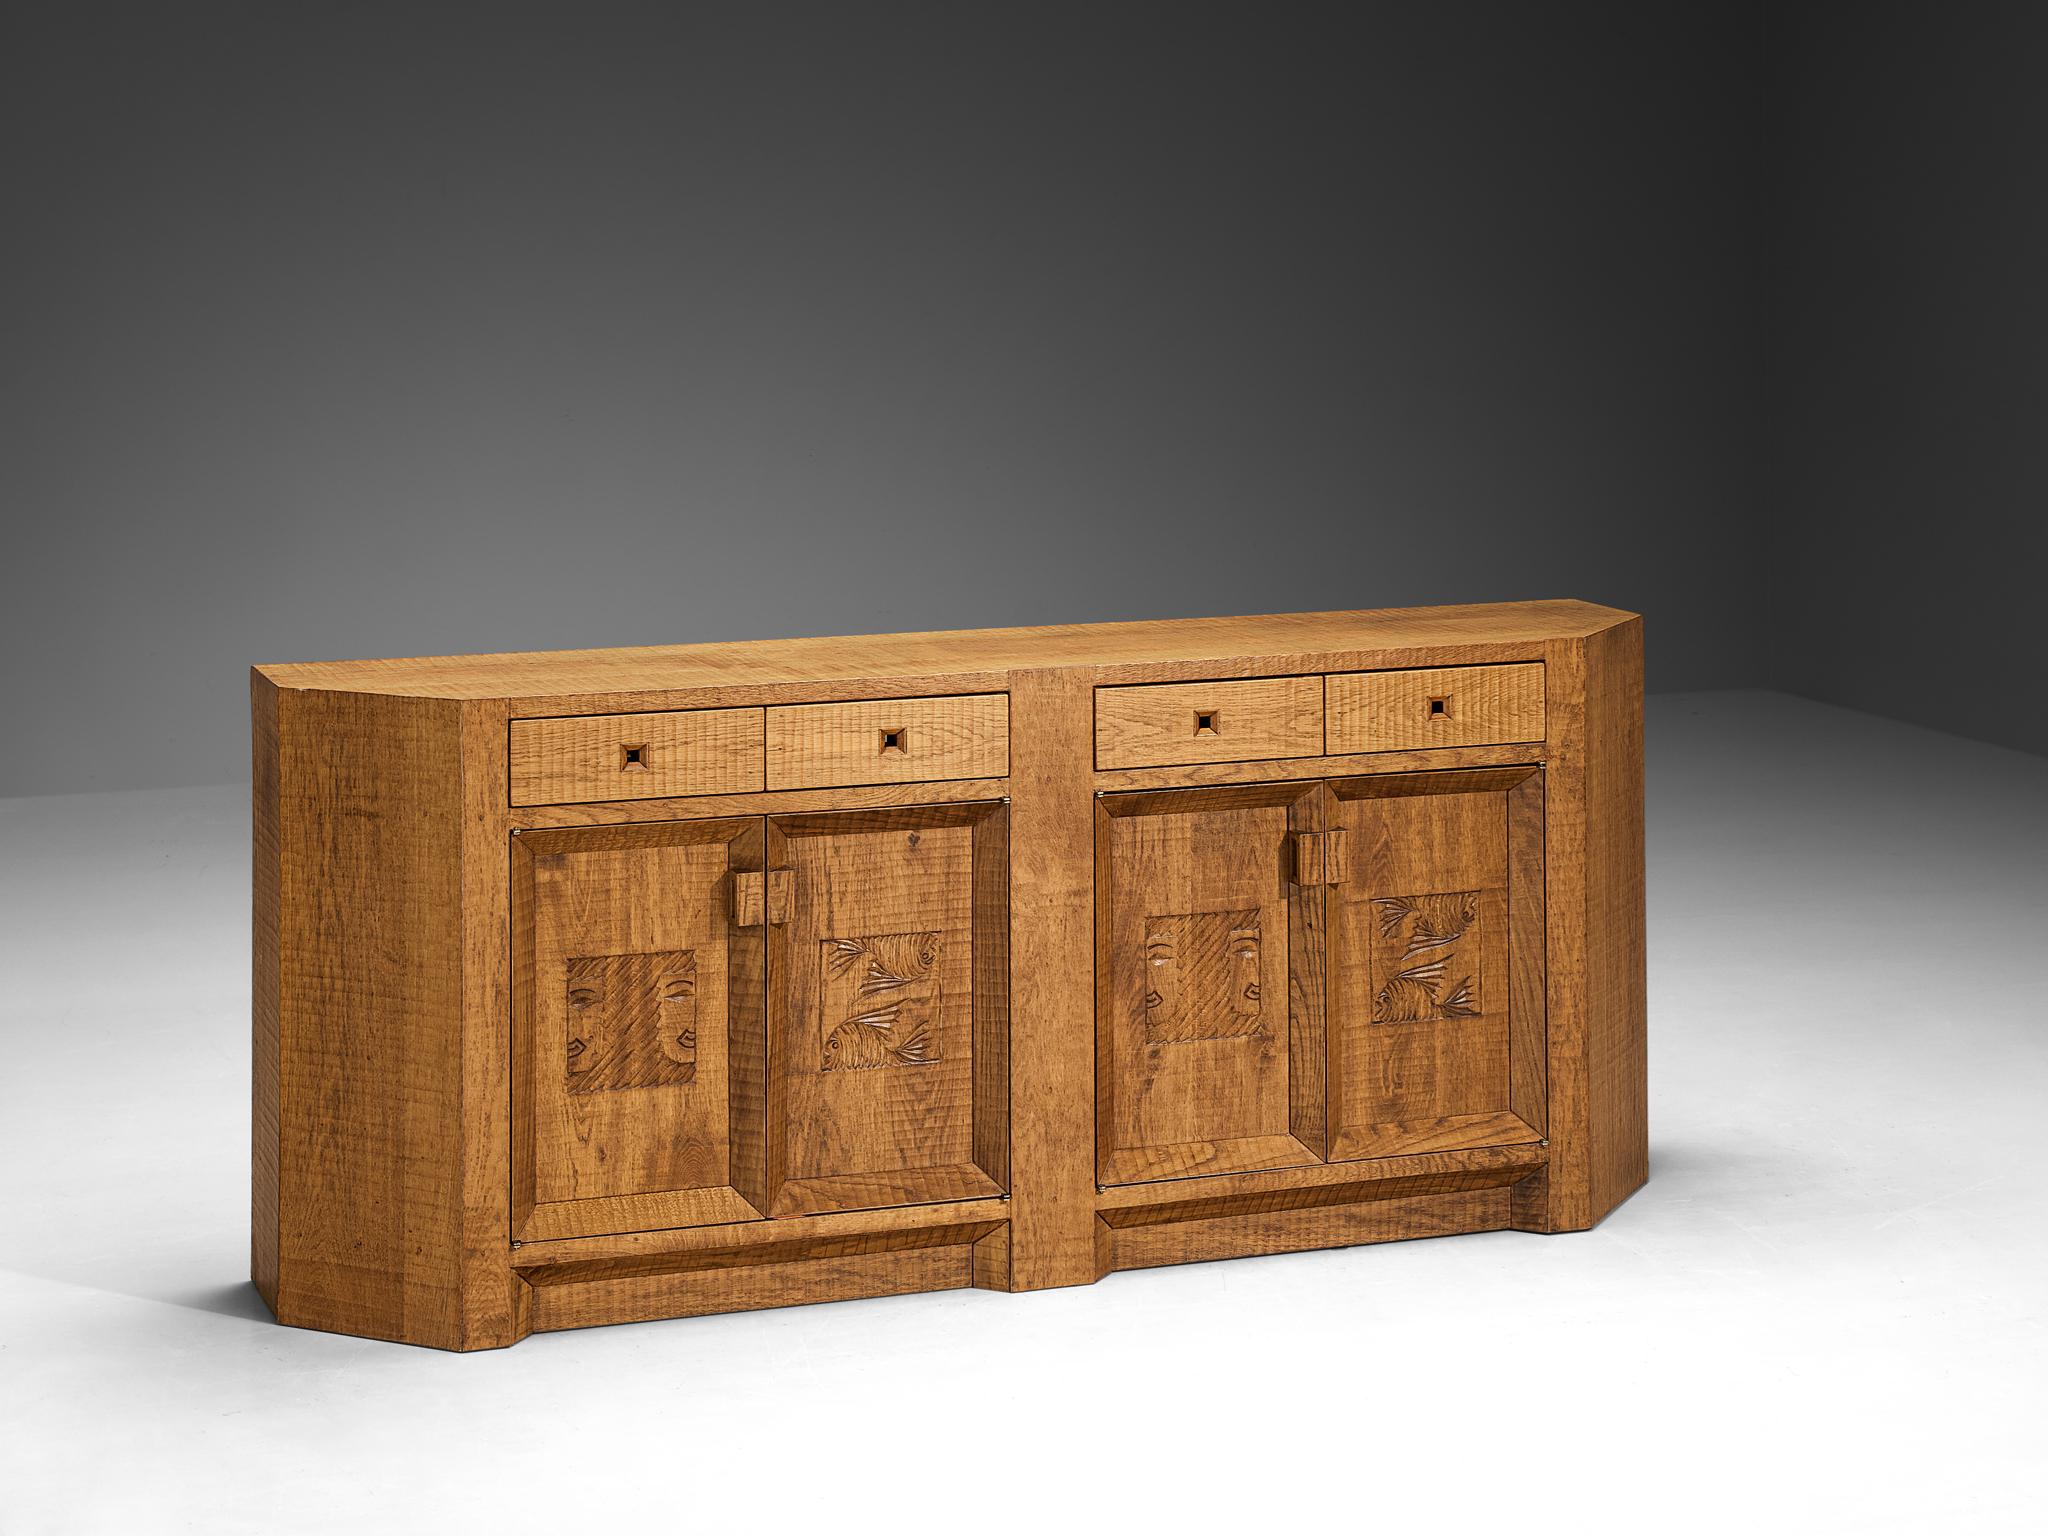 Giuseppe Rivadossi for Officina Rivadossi, sideboard, oak, glass, Italy, 1970s/80s

An exceptional credenza by the Italian sculptor and designer Giuseppe Rivadossi, featuring a high level of craftsmanship in woodwork. The doorpanels feature visually